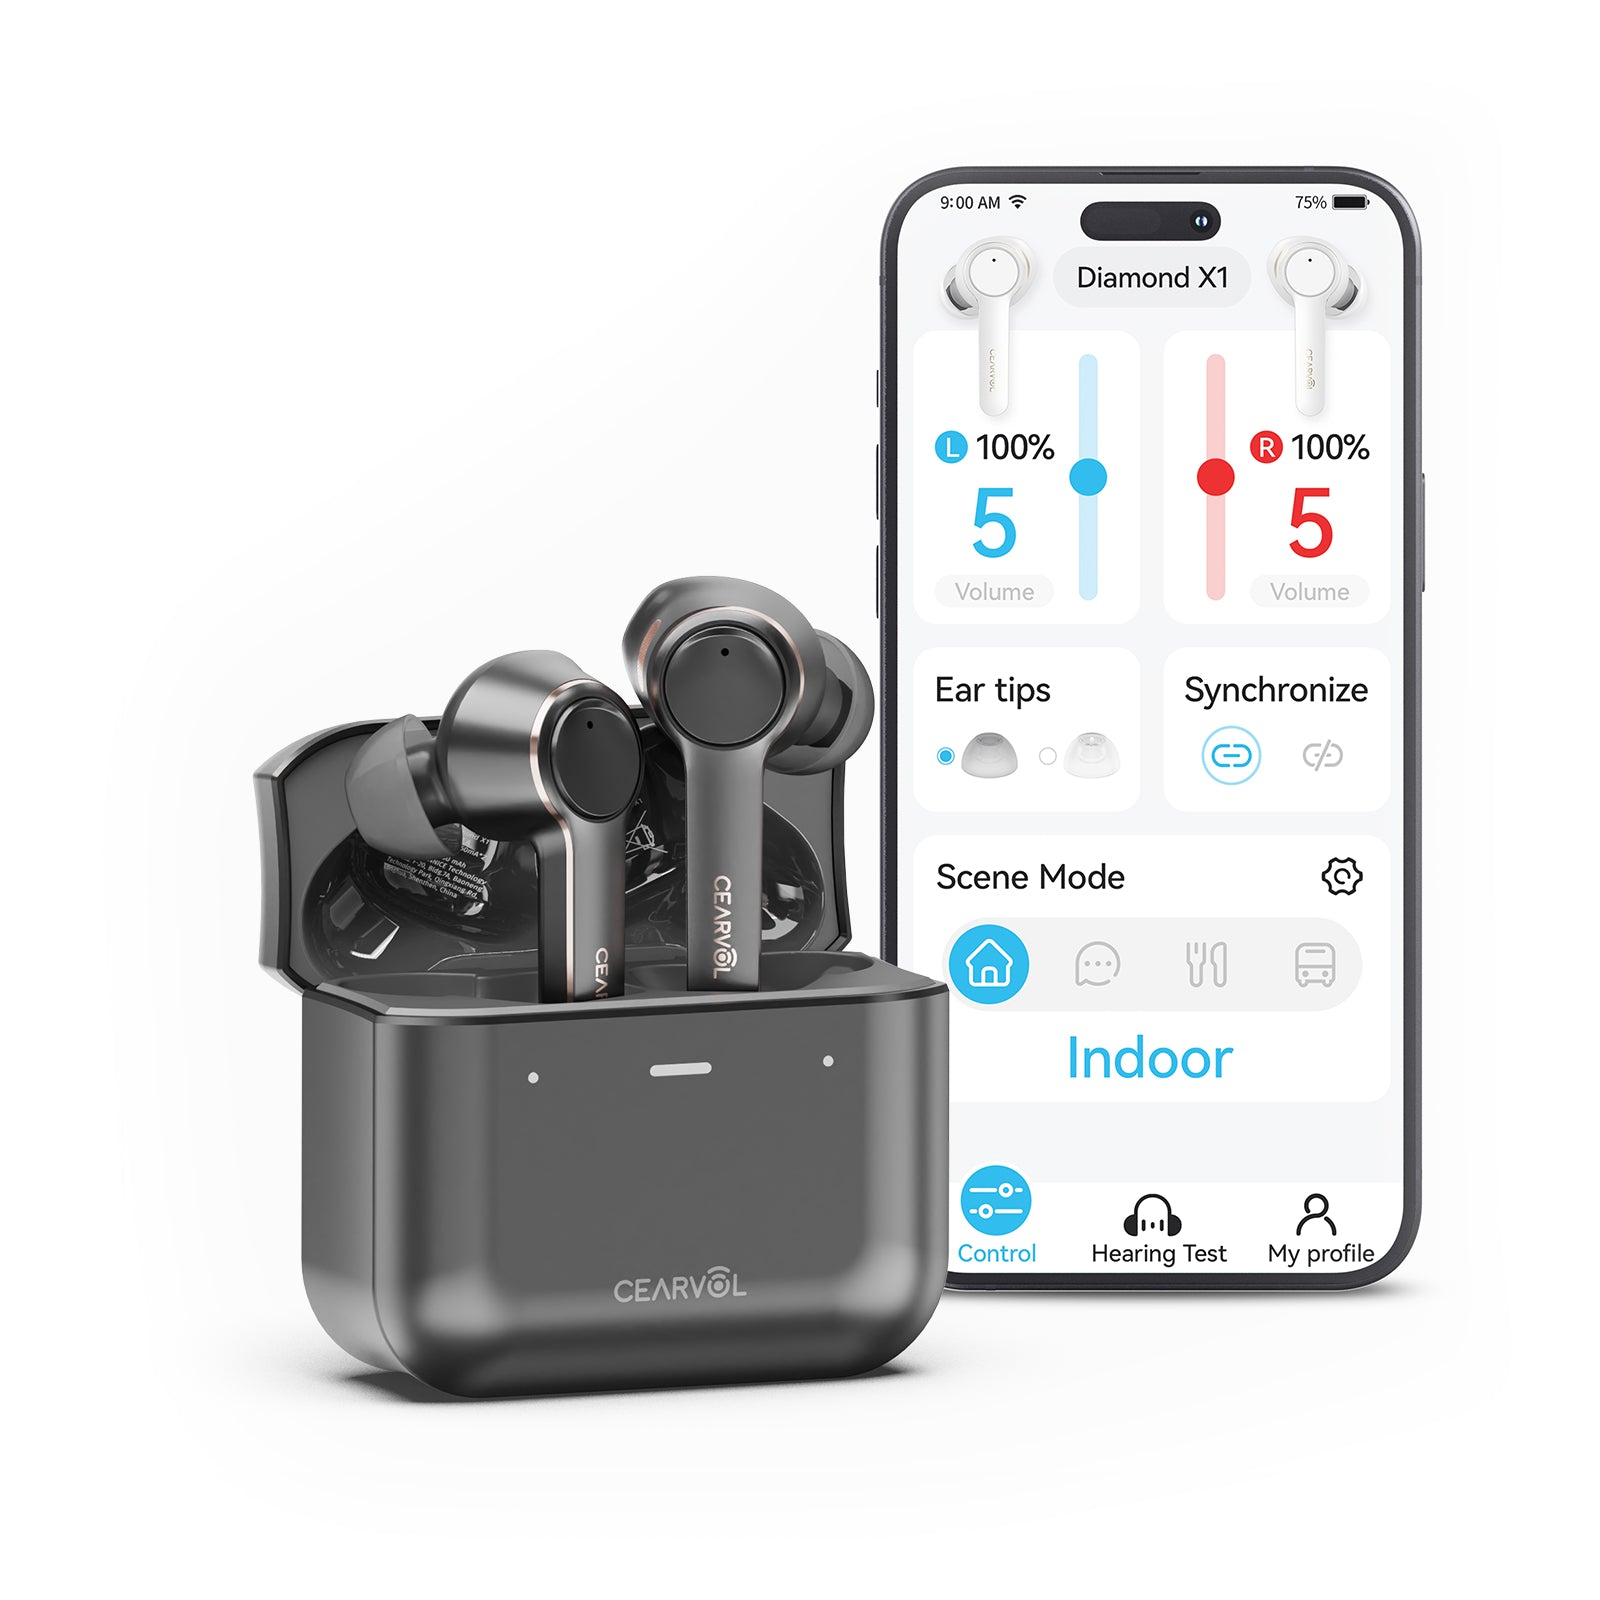 Buying Guide for OTC Bluetooth Hearing Aids: Cearvol Diamond X1 Intelligent Hearing Aids